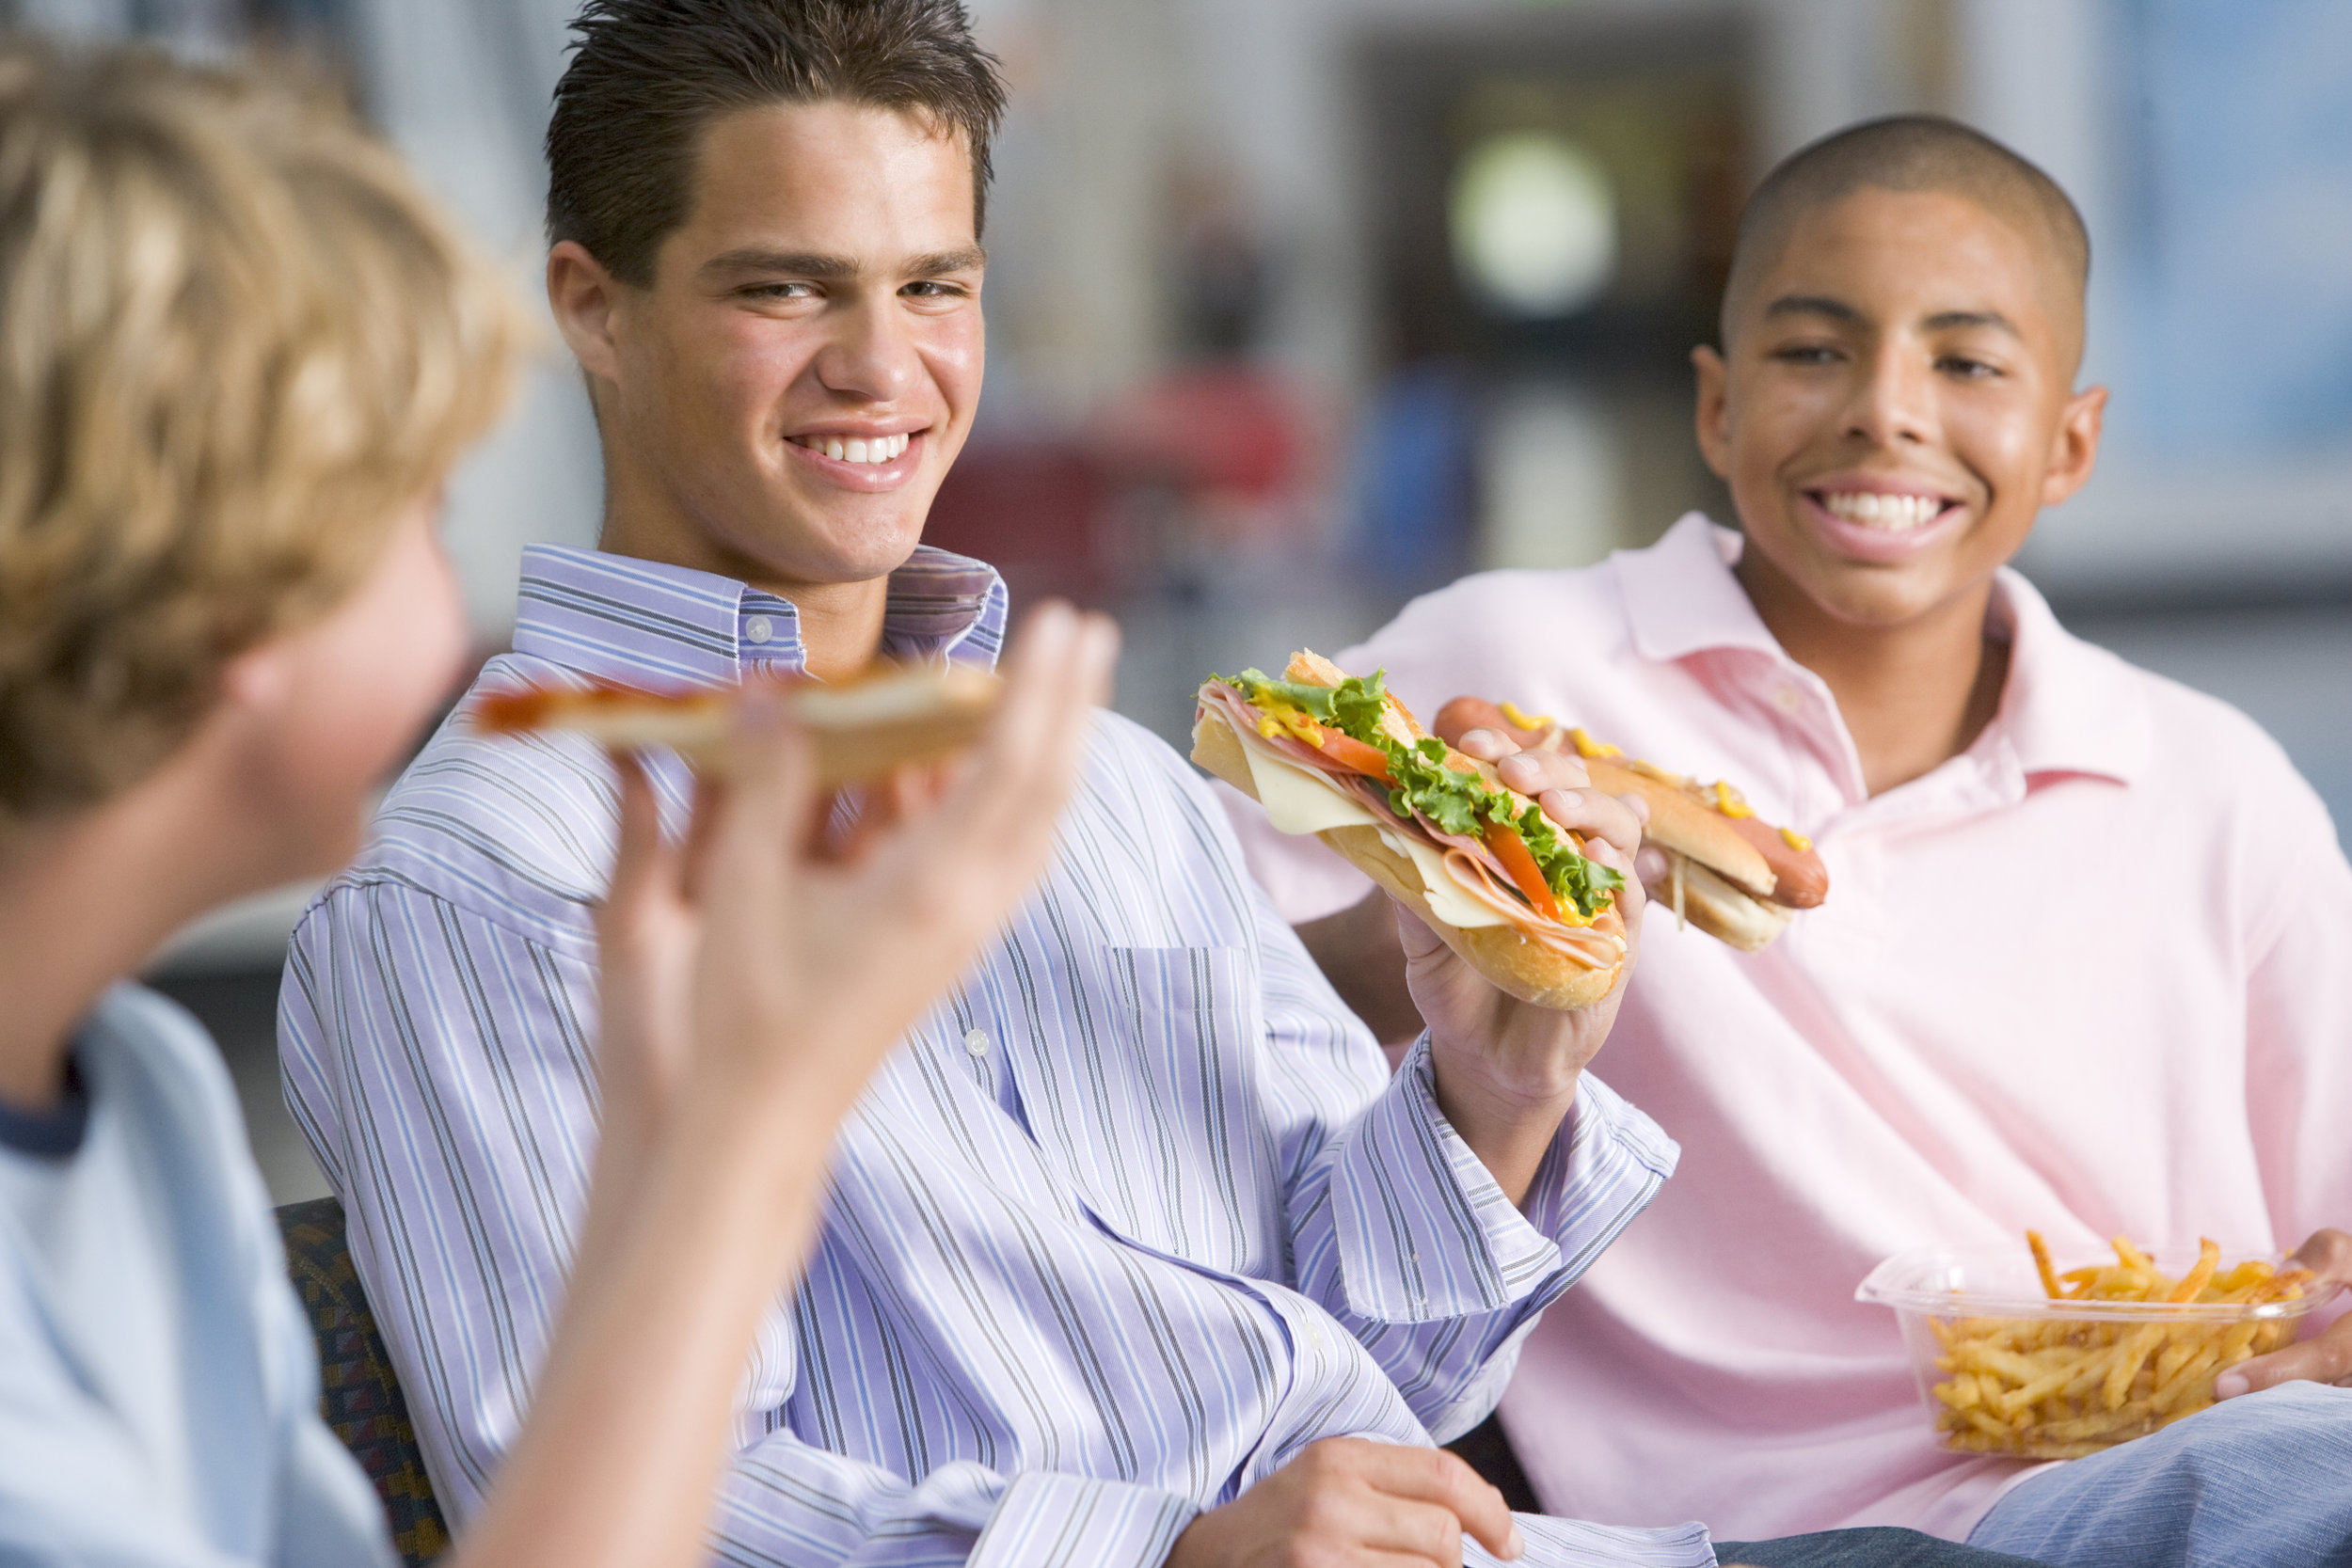 teenage-boys-enjoying-fast-food-lunches-together_BYQe0Crs.jpg